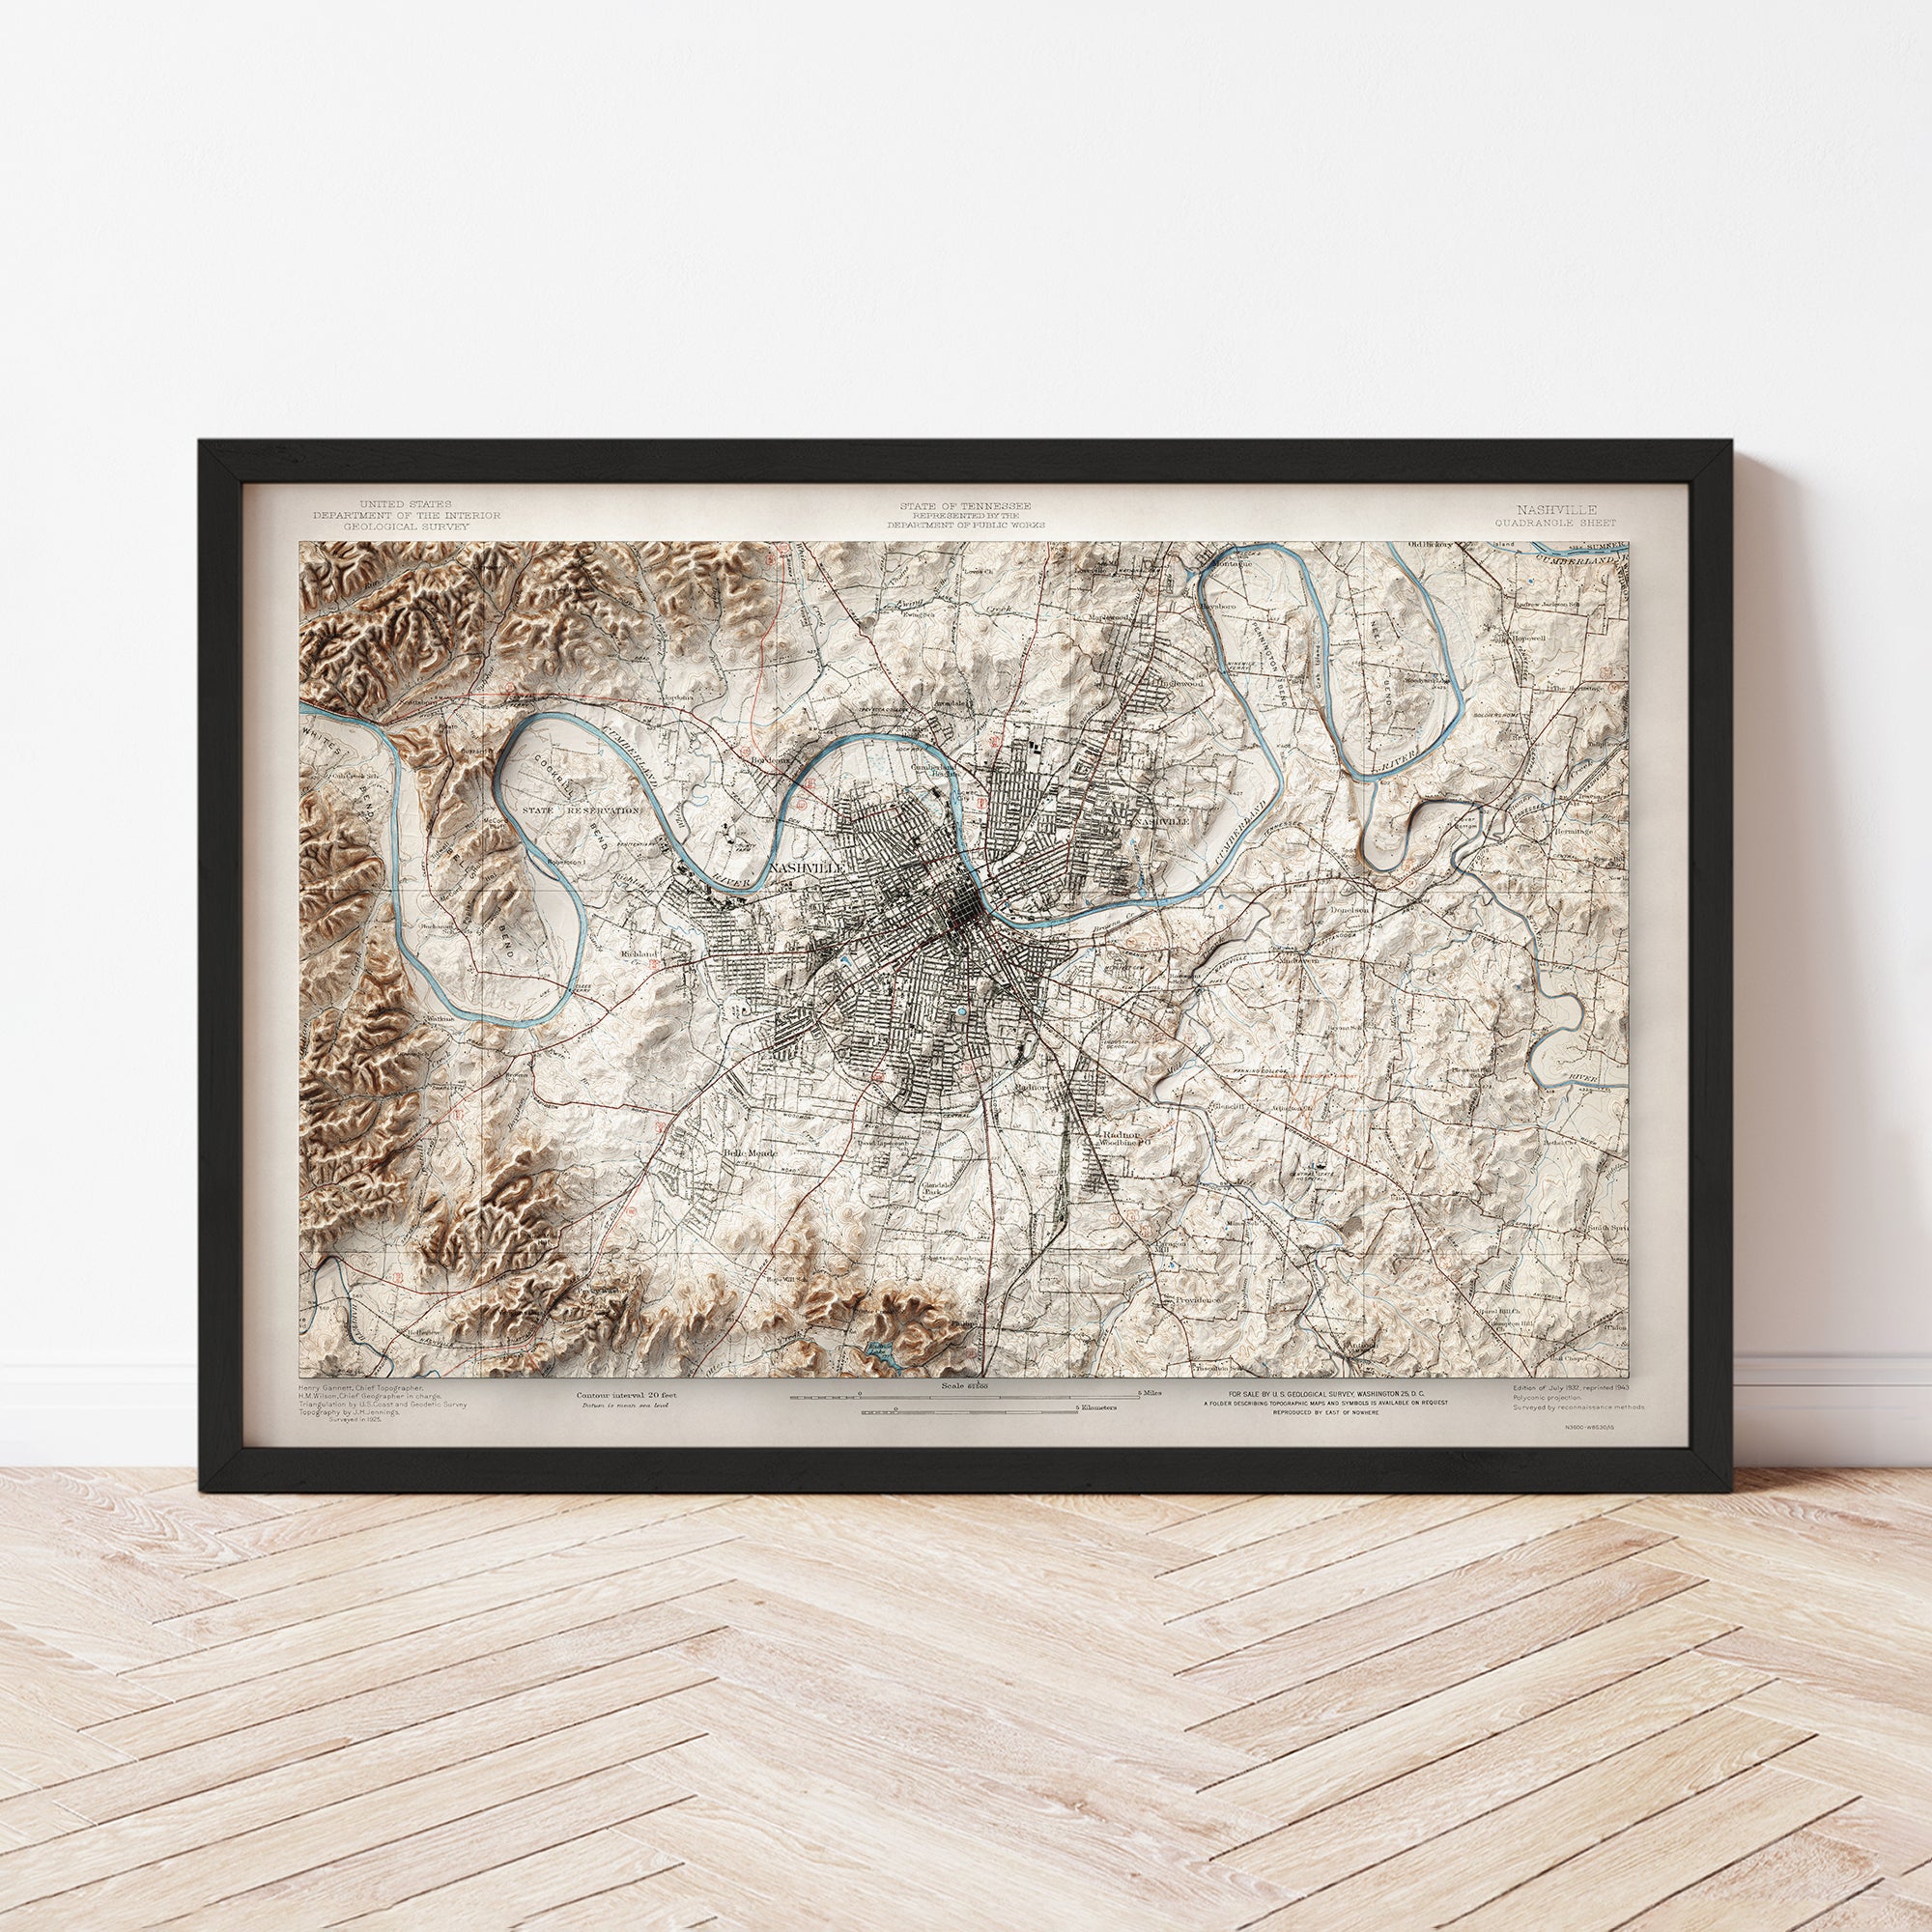 Nashville, TN - Vintage Shaded Relief Map (1932)